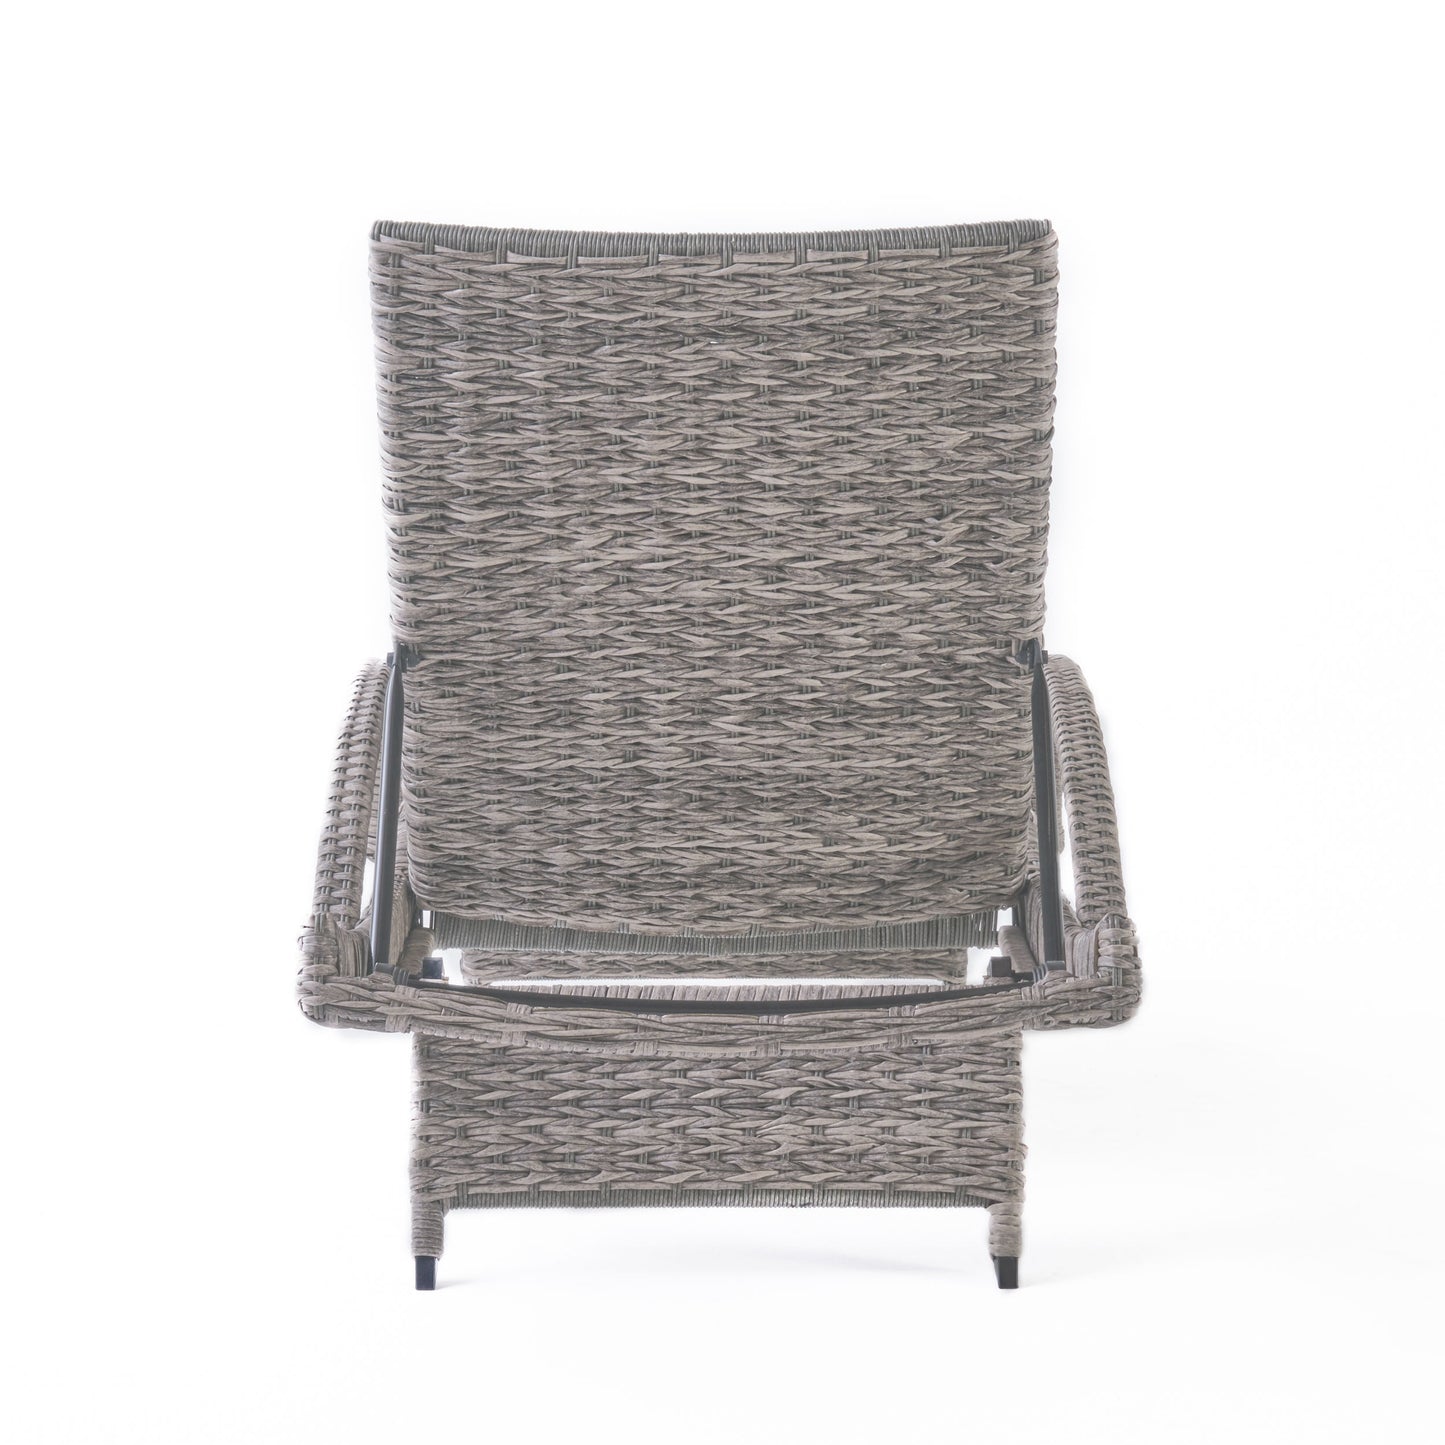 Keira Outdoor Armed Aluminum Framed Grey Wicker Chaise Lounge